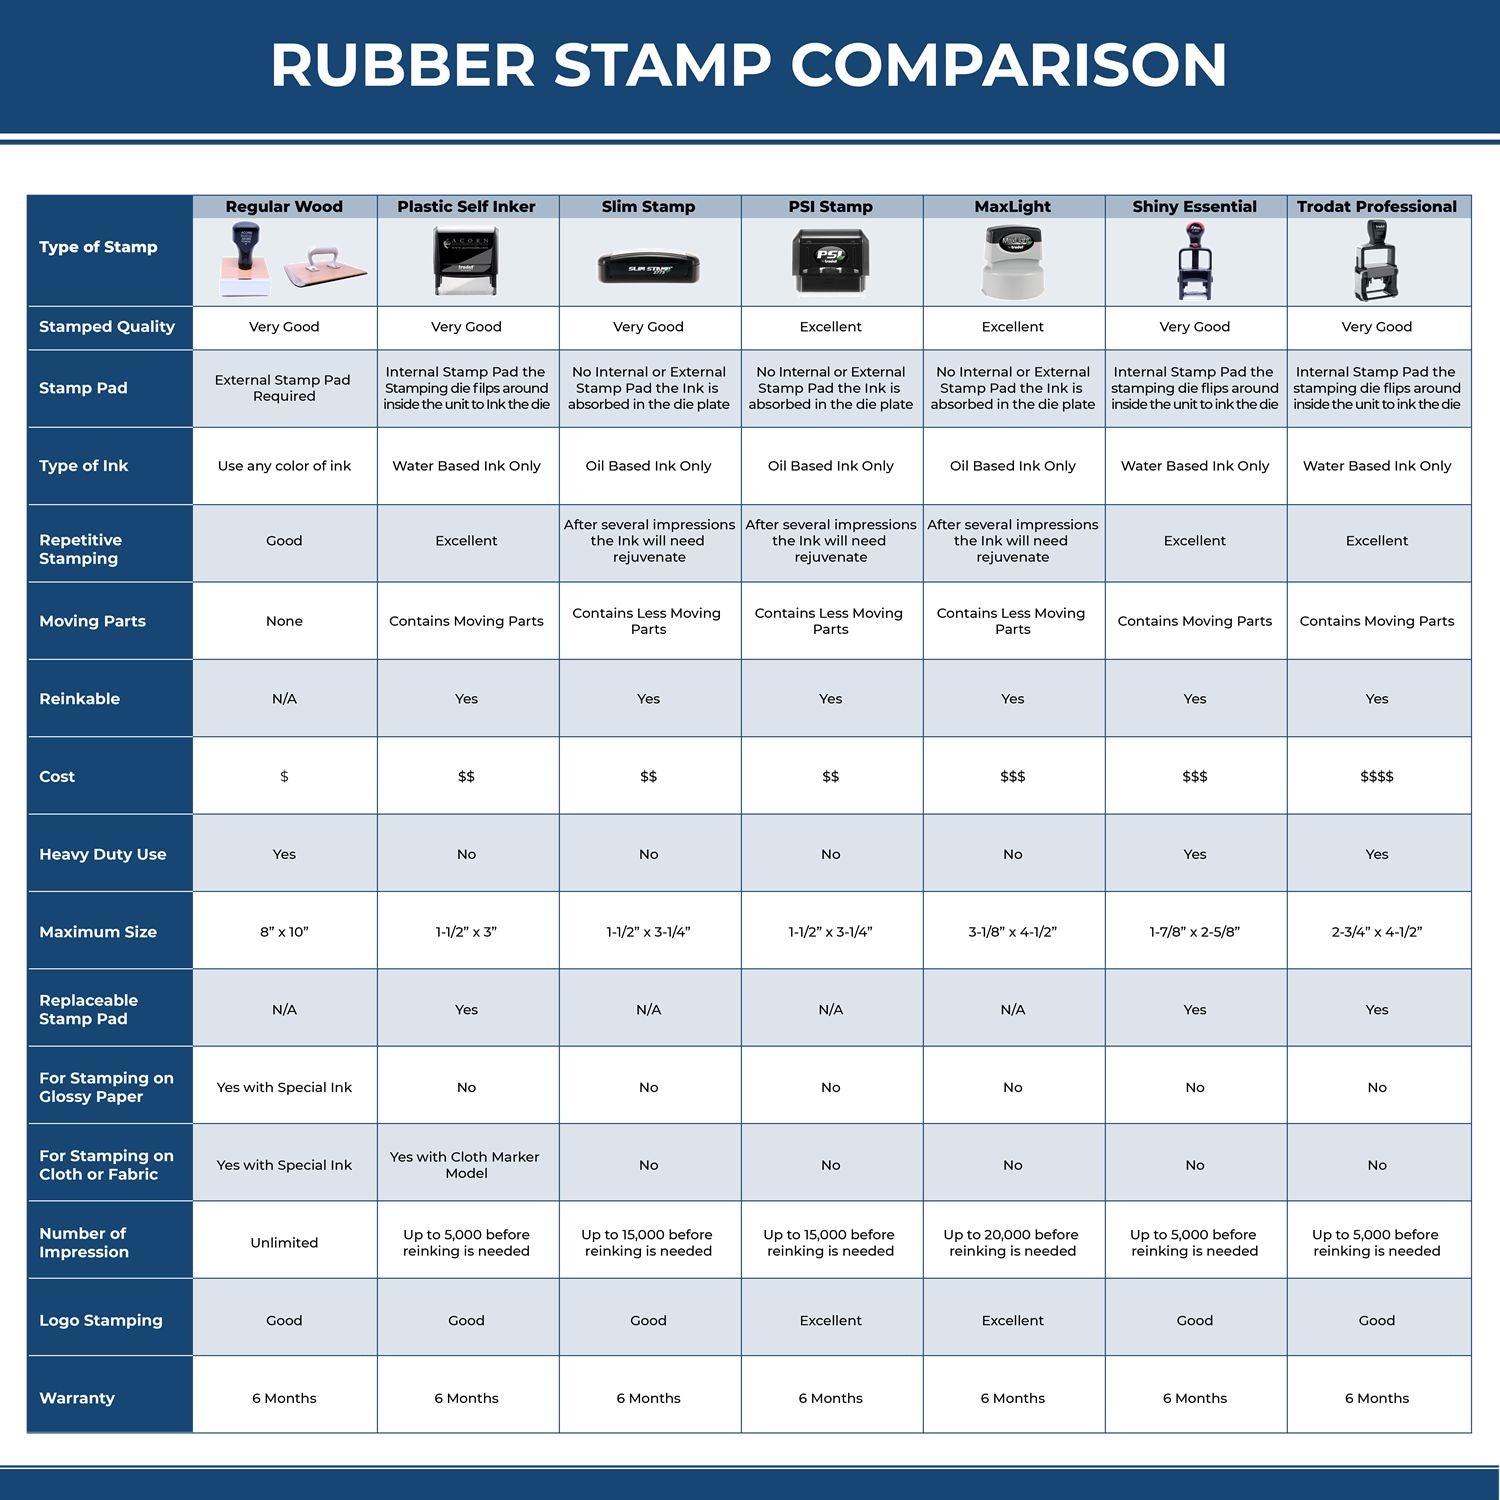 A comparison chart for the different types of mount models available for the Premium MaxLight Pre-Inked South Dakota Engineering Stamp.